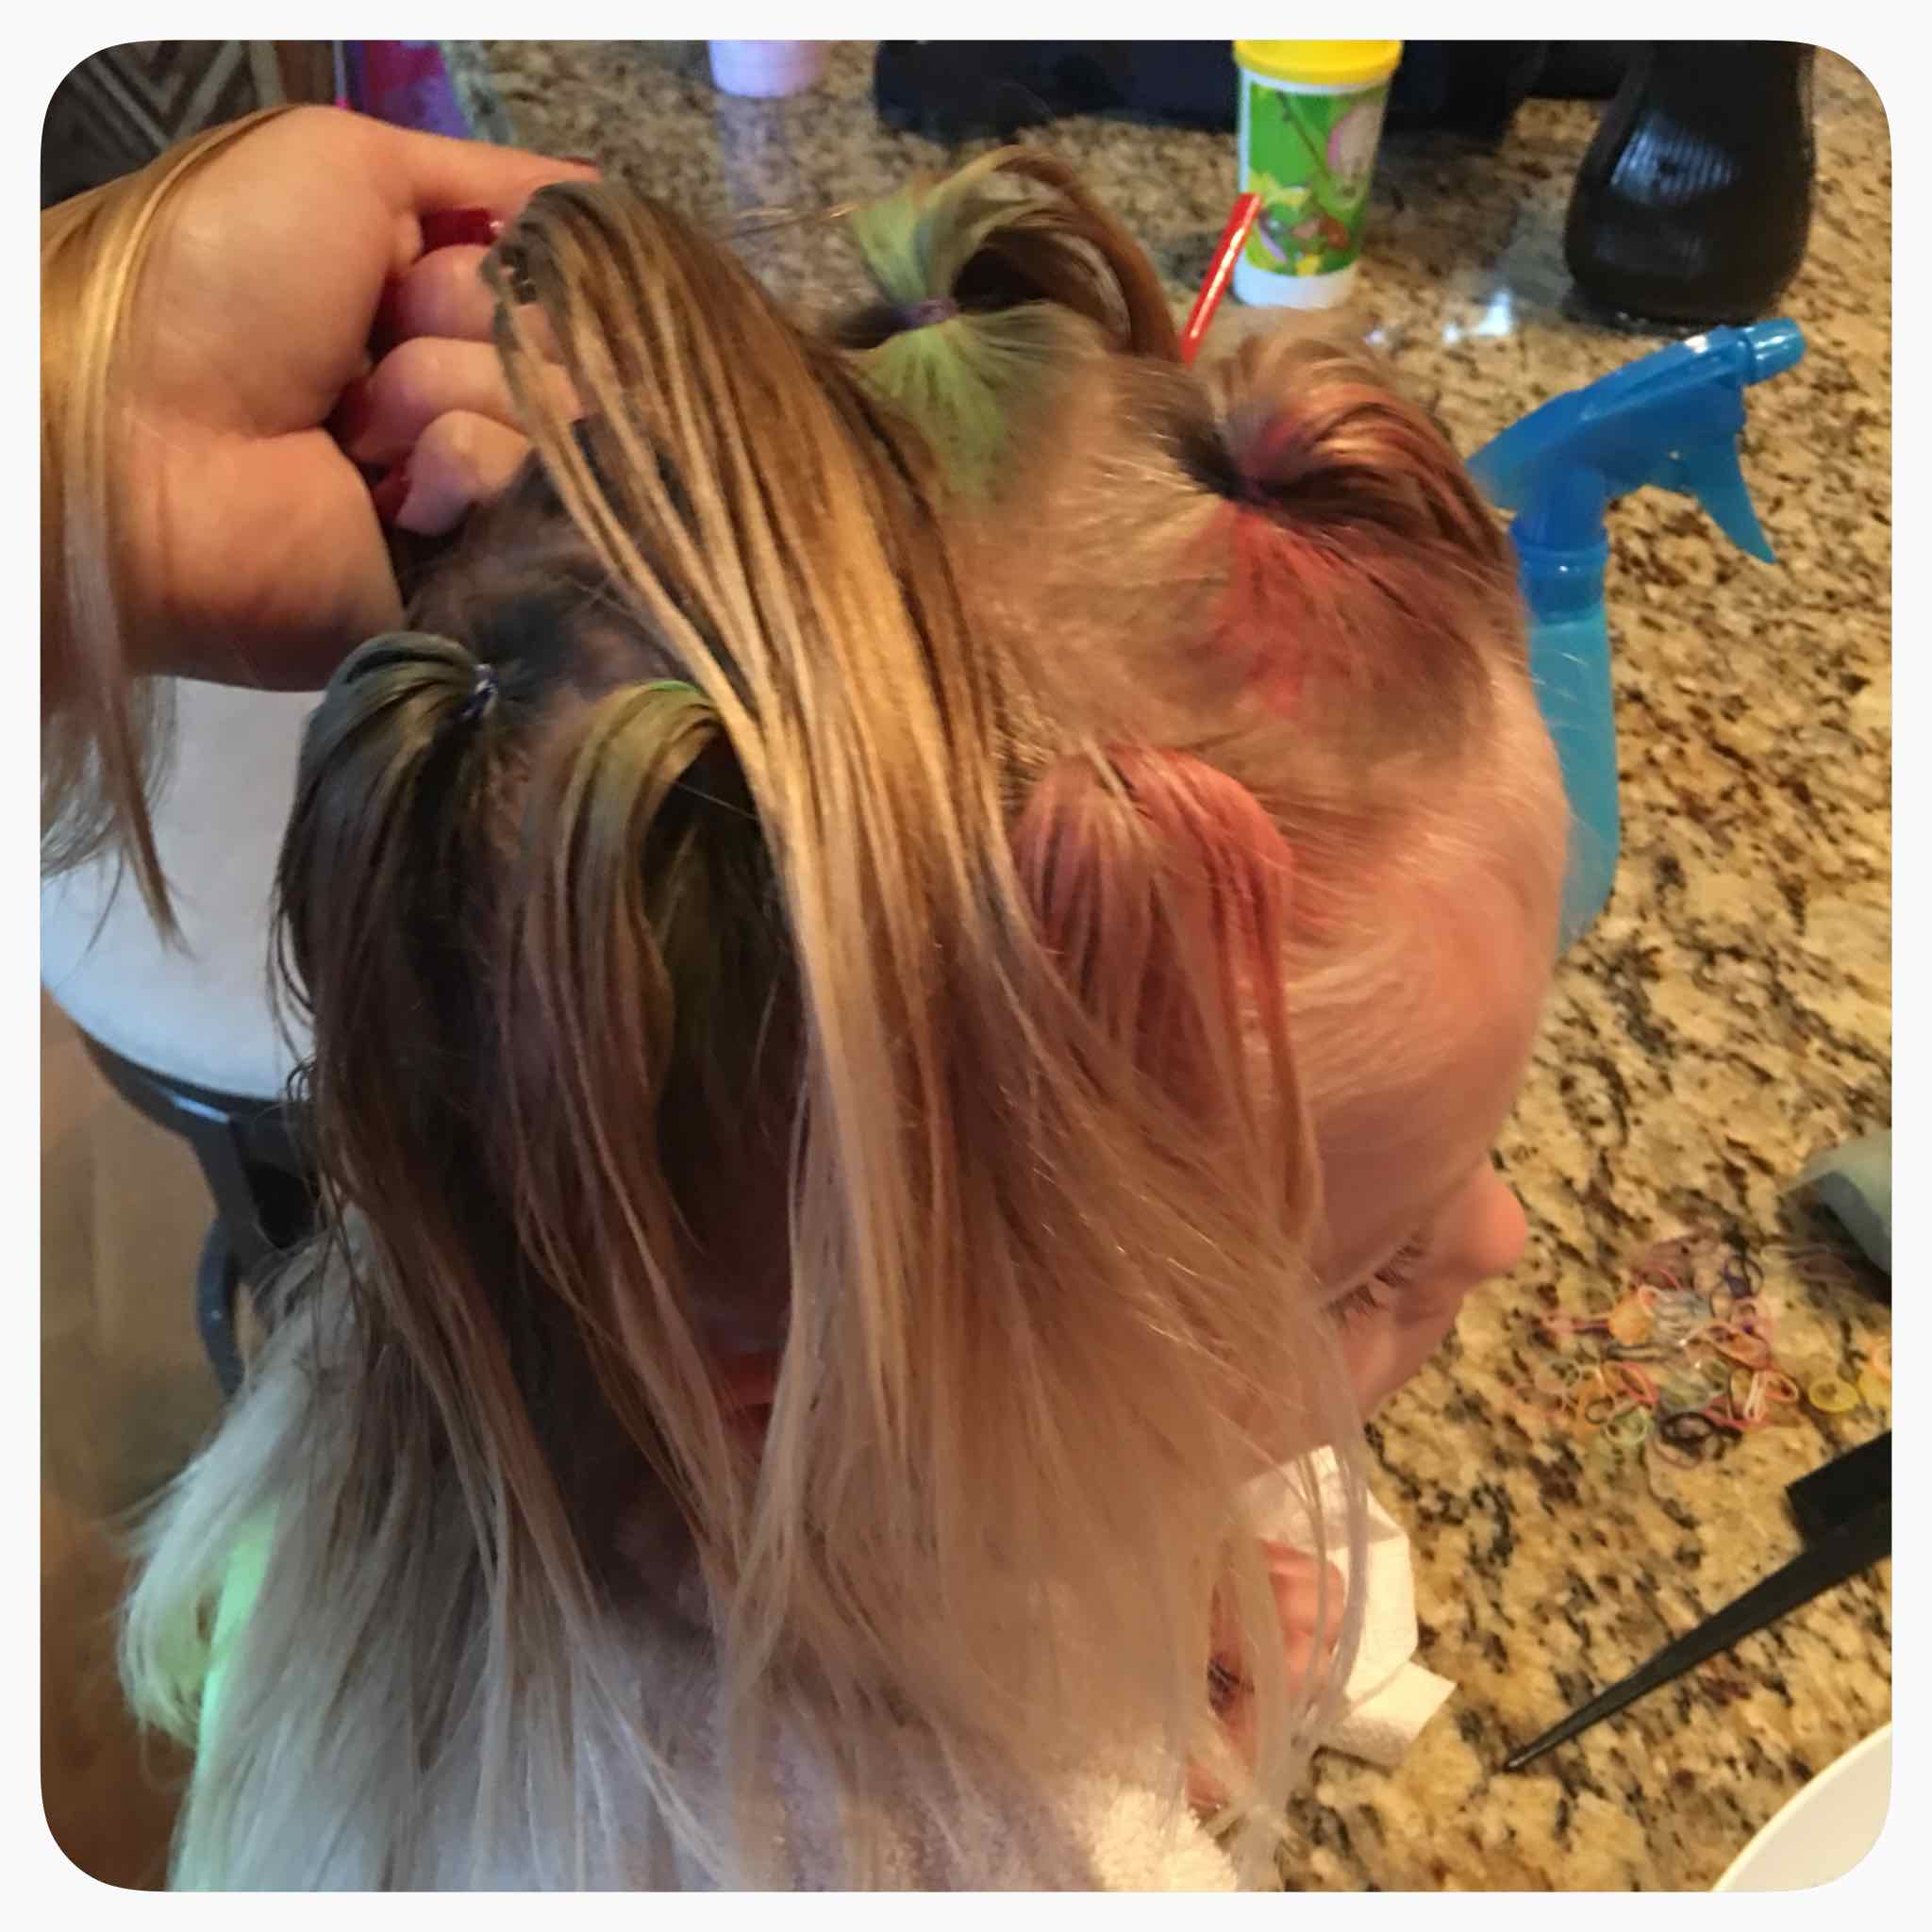 Crazy Hair Day: back to school means lots of spirit days. Here is a simple way to create crazy hair and doesn't take too long.